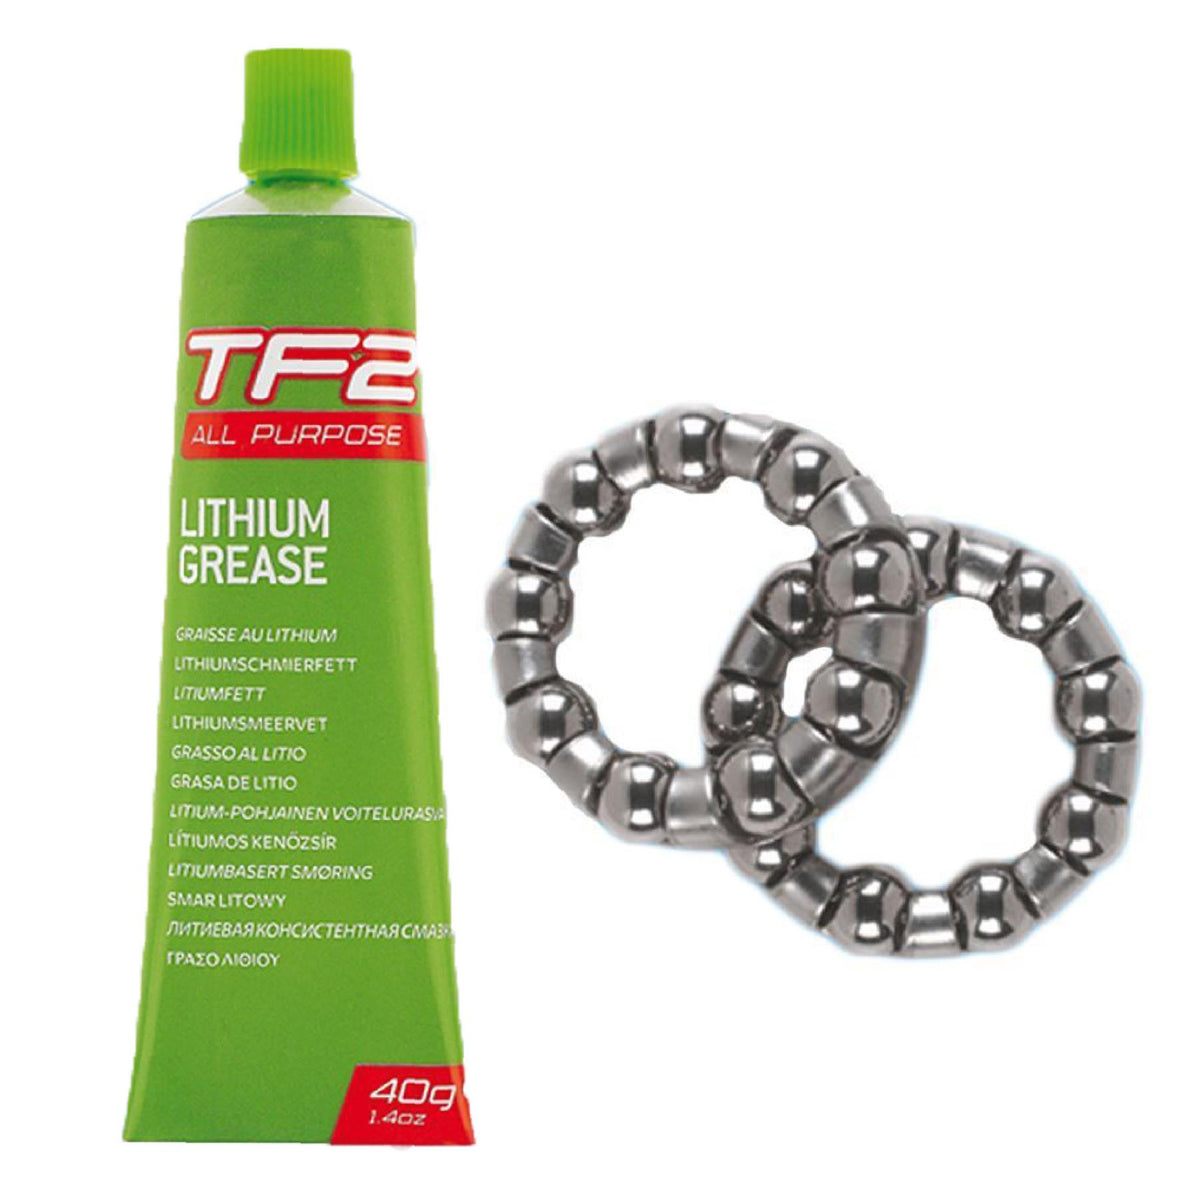 Weldtite 1/4" BB Cages & Grease